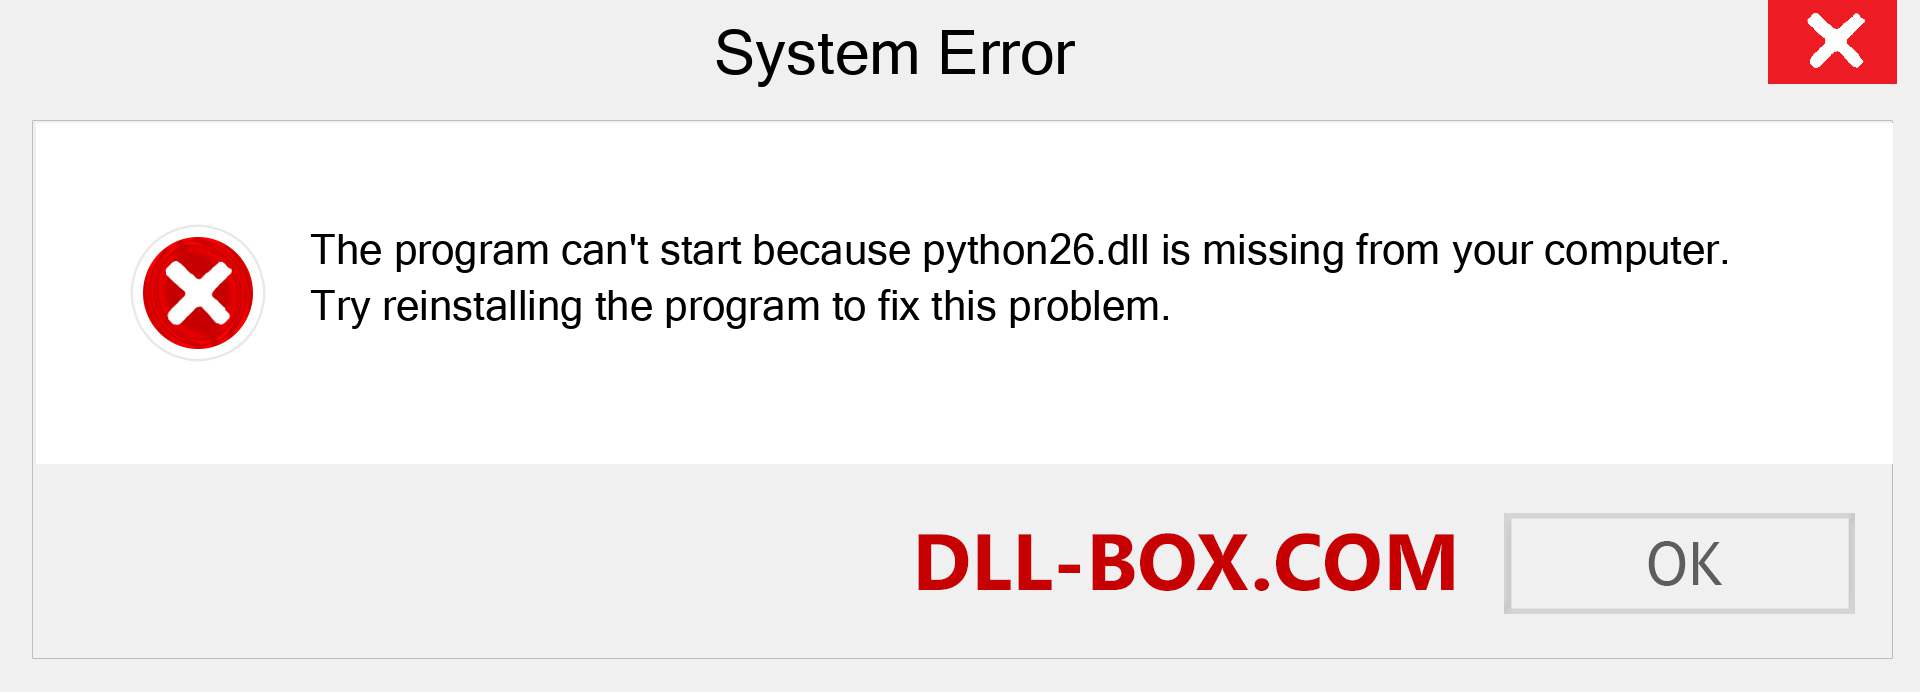  python26.dll file is missing?. Download for Windows 7, 8, 10 - Fix  python26 dll Missing Error on Windows, photos, images